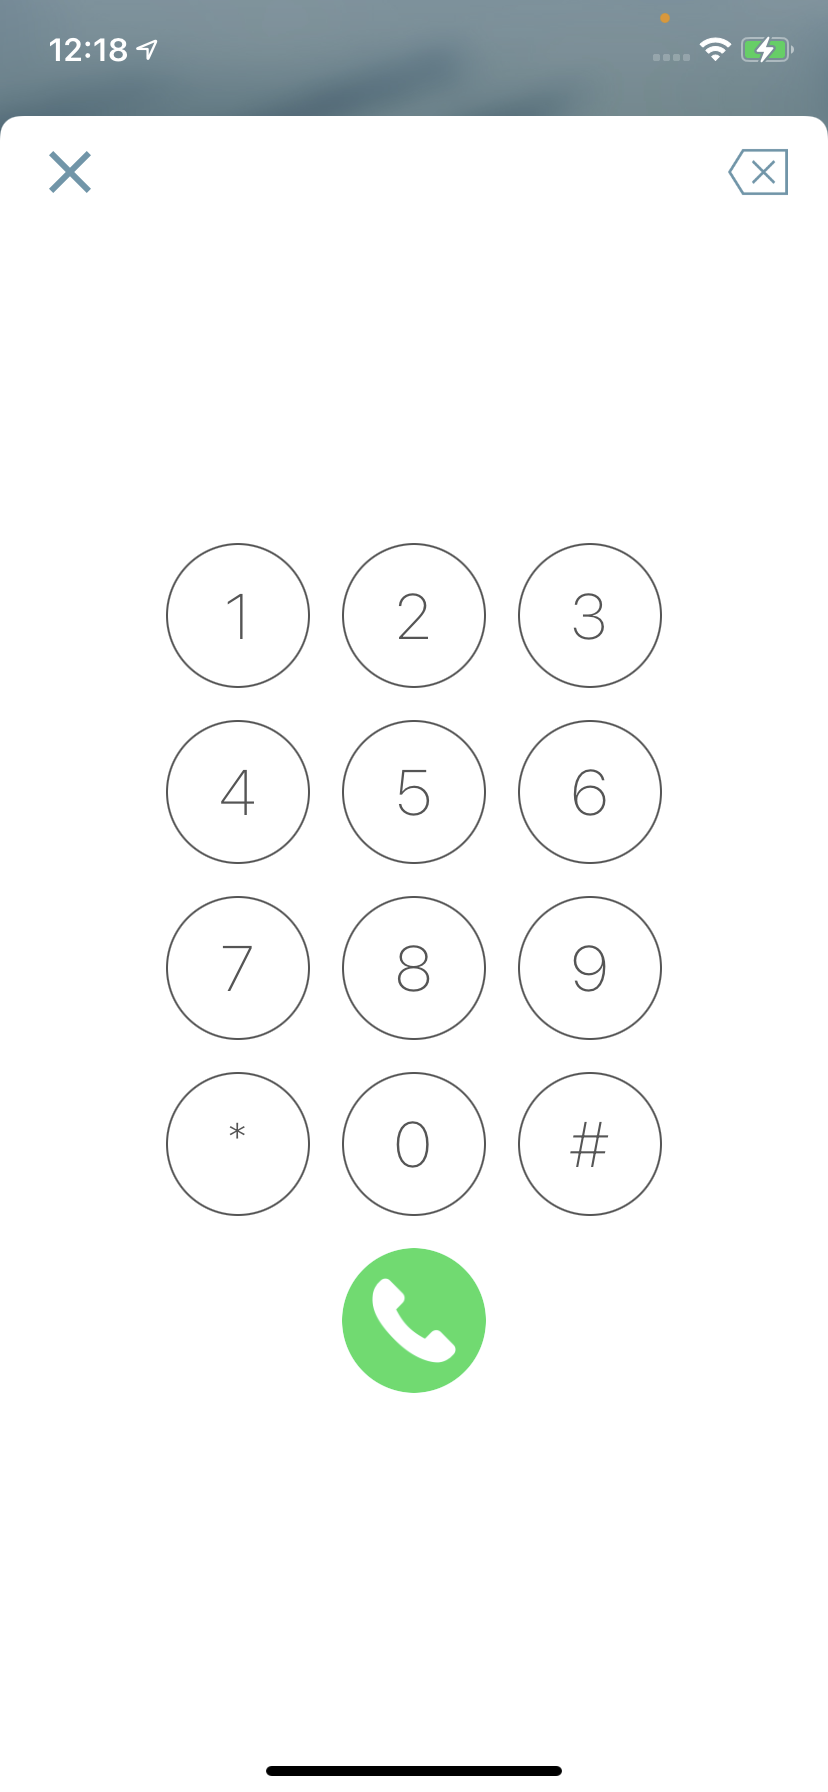 _images/Transfer_call_dialpad.png